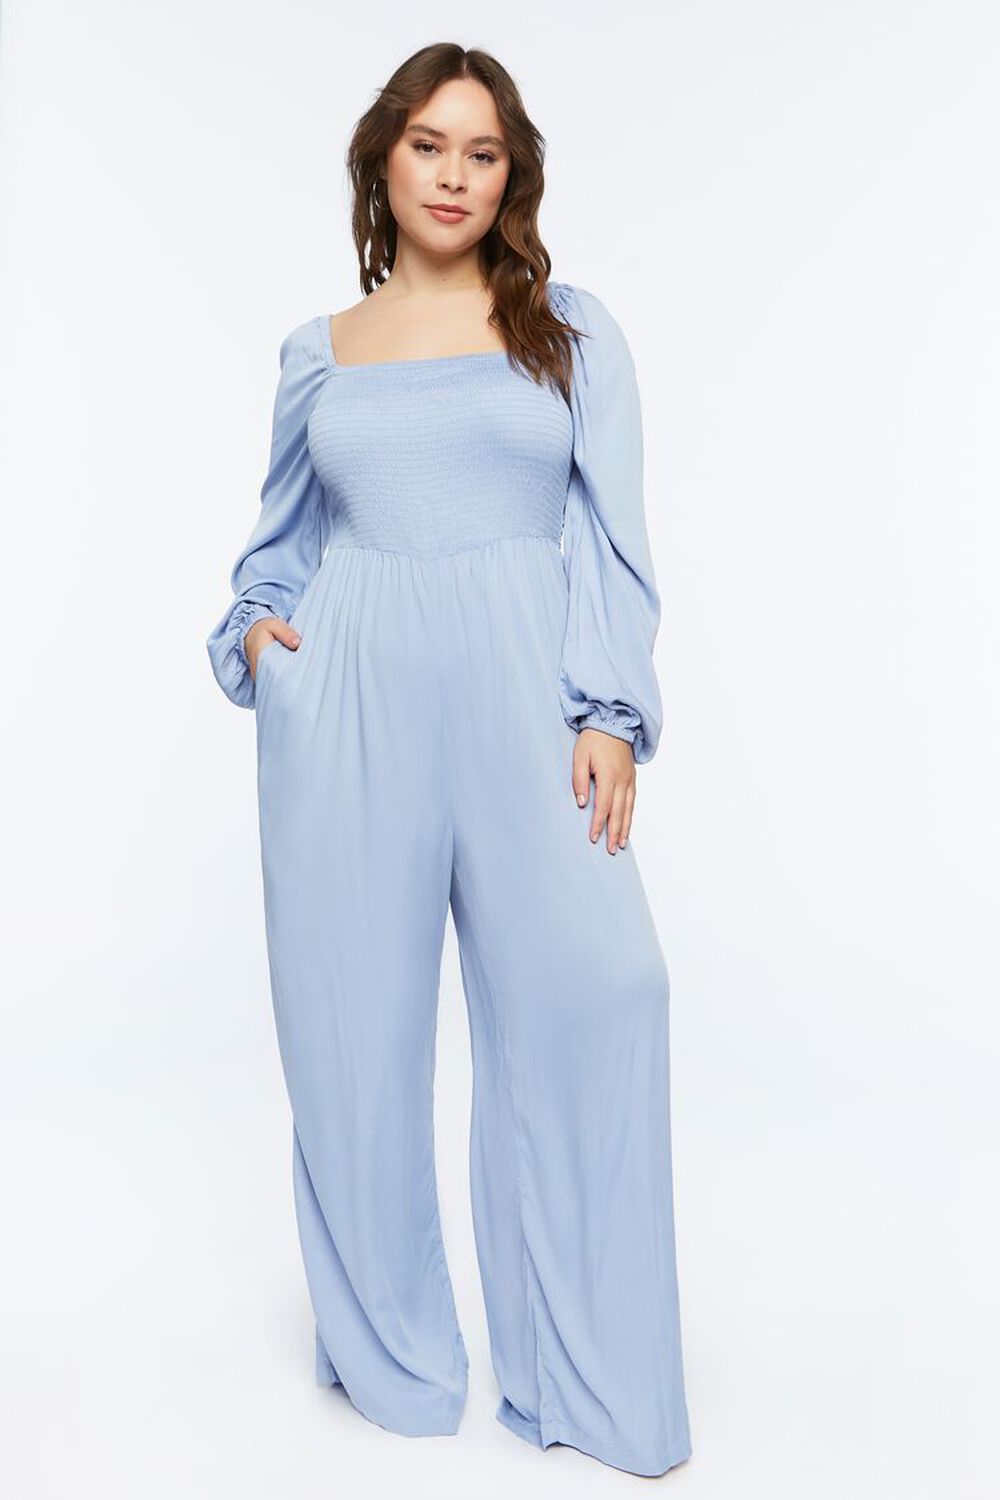 Whizmax Plus Size Casual Jumpsuits for Women Outfits Tie Belt Bell Sleeve  Smocked Beach Wide Leg Floral Jumpsuits